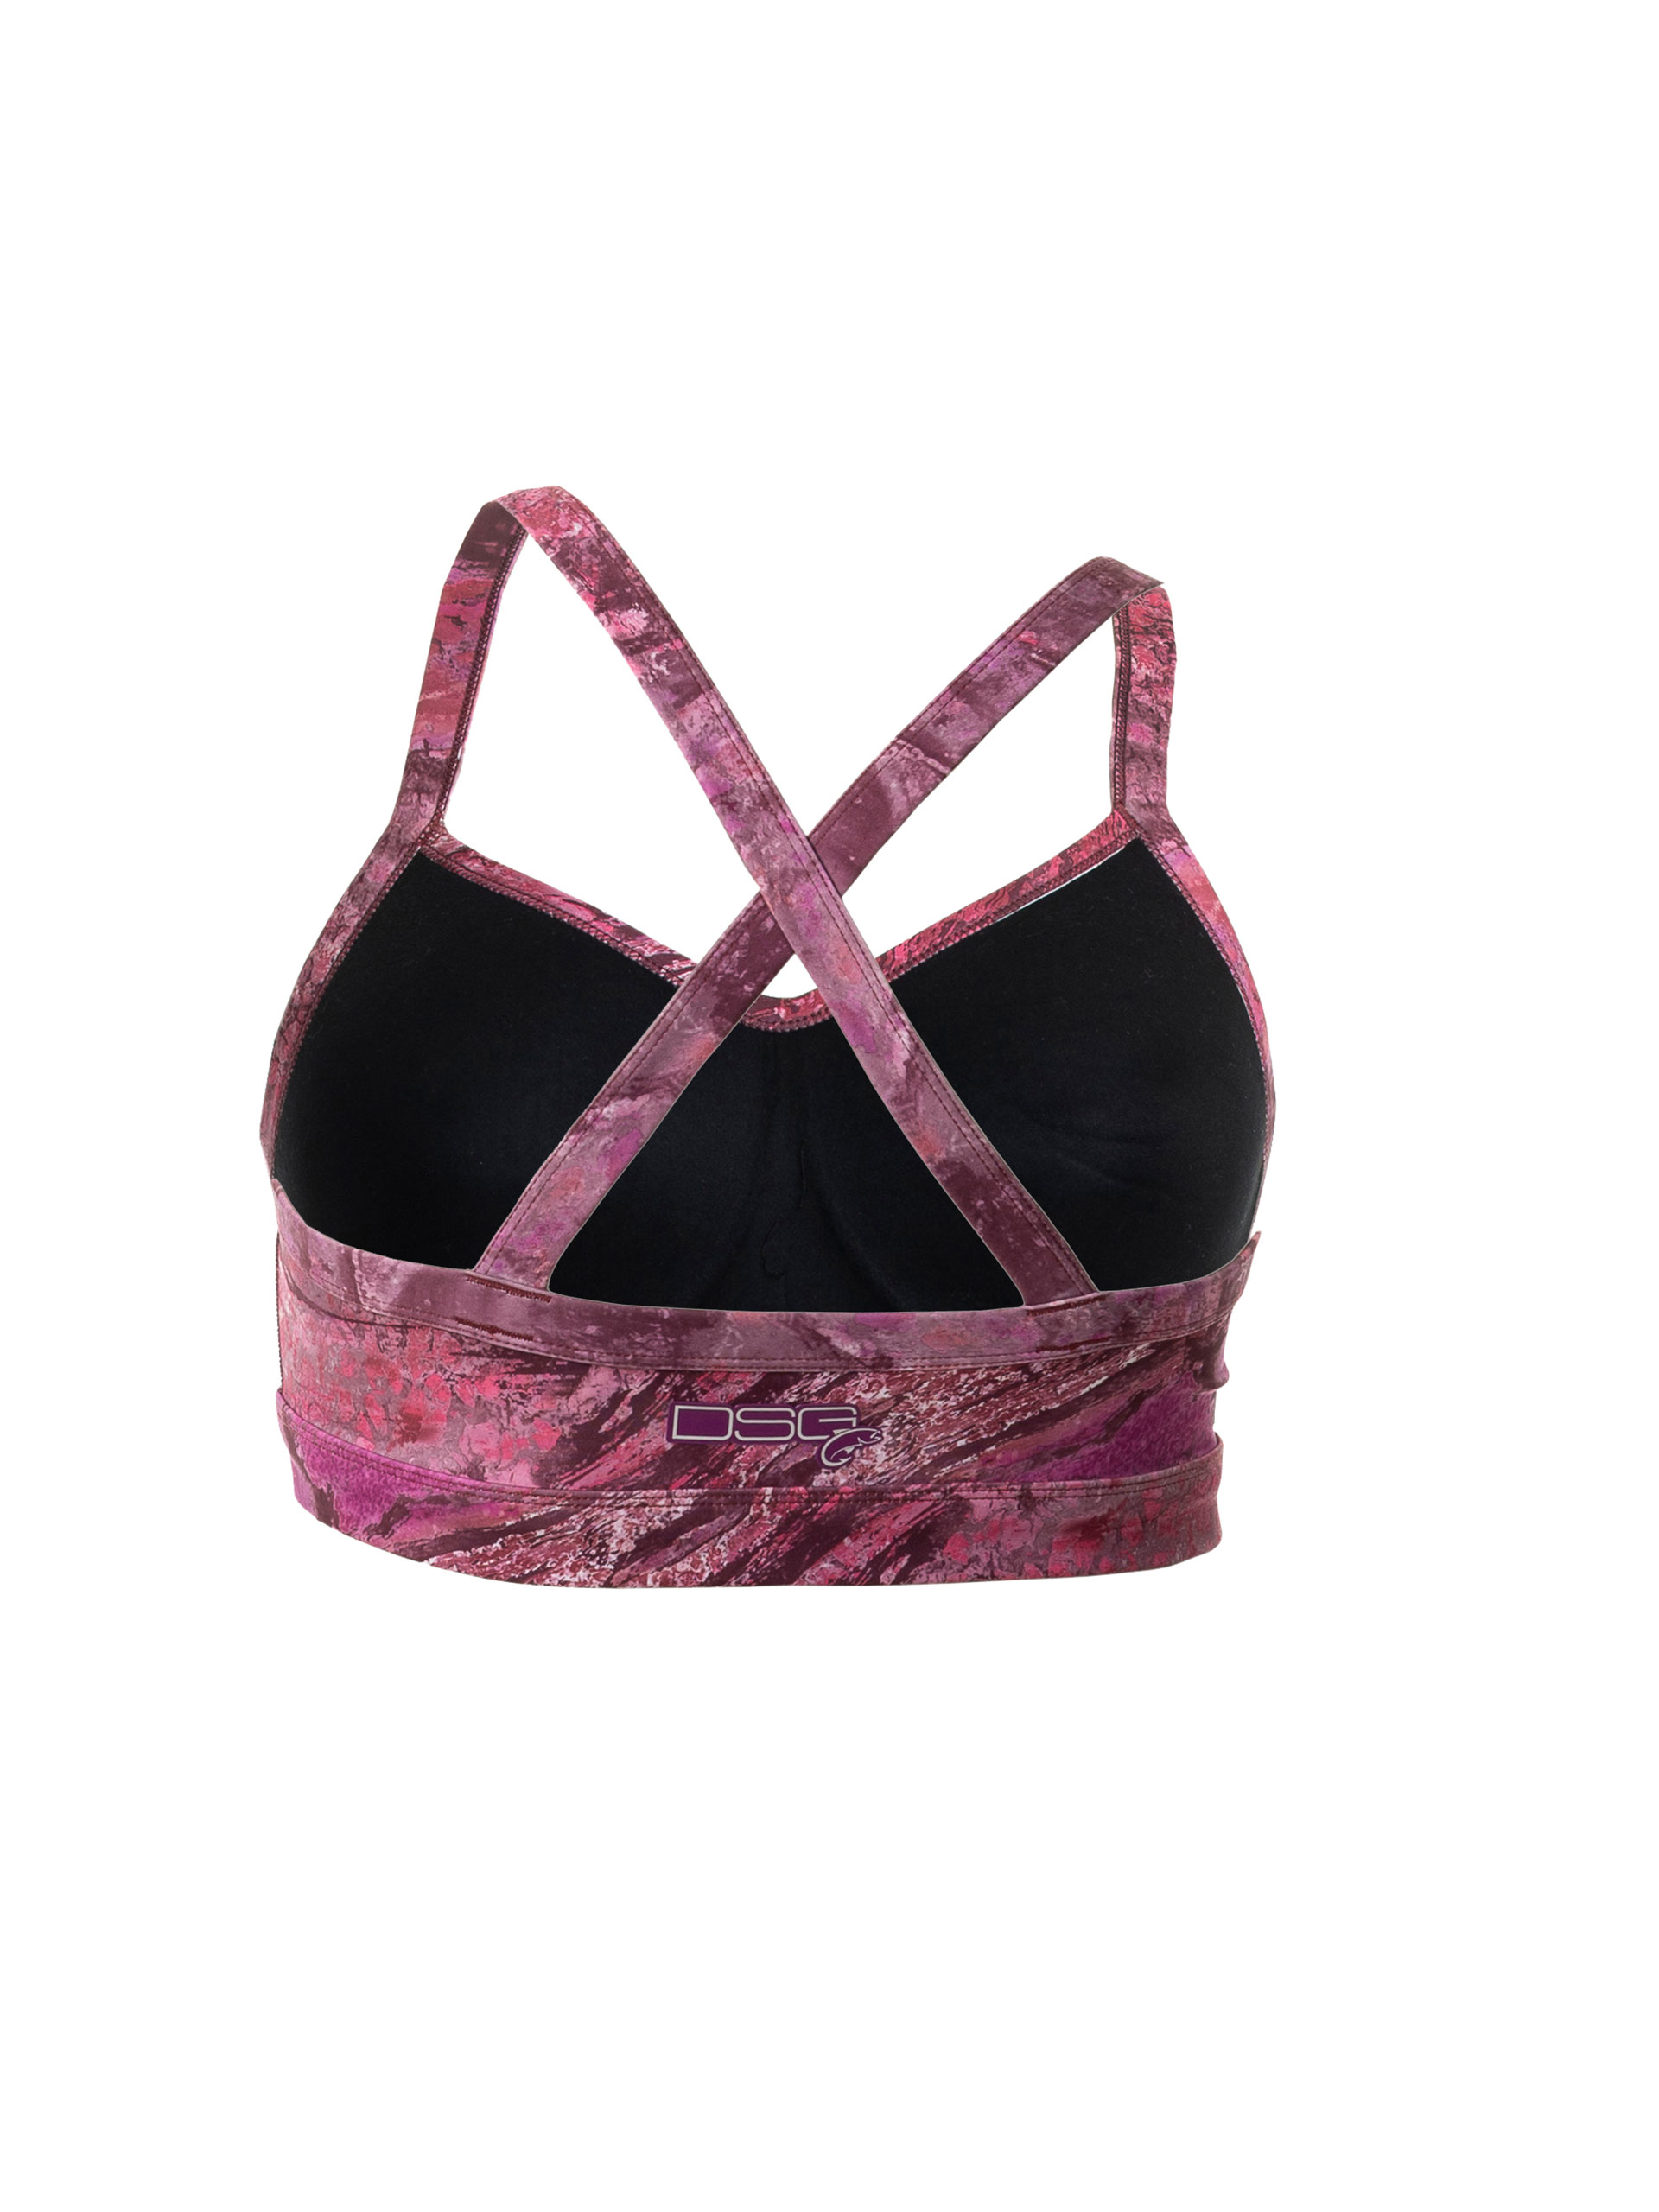 Pink Victoria secret sports bra, Brought for £24, Size